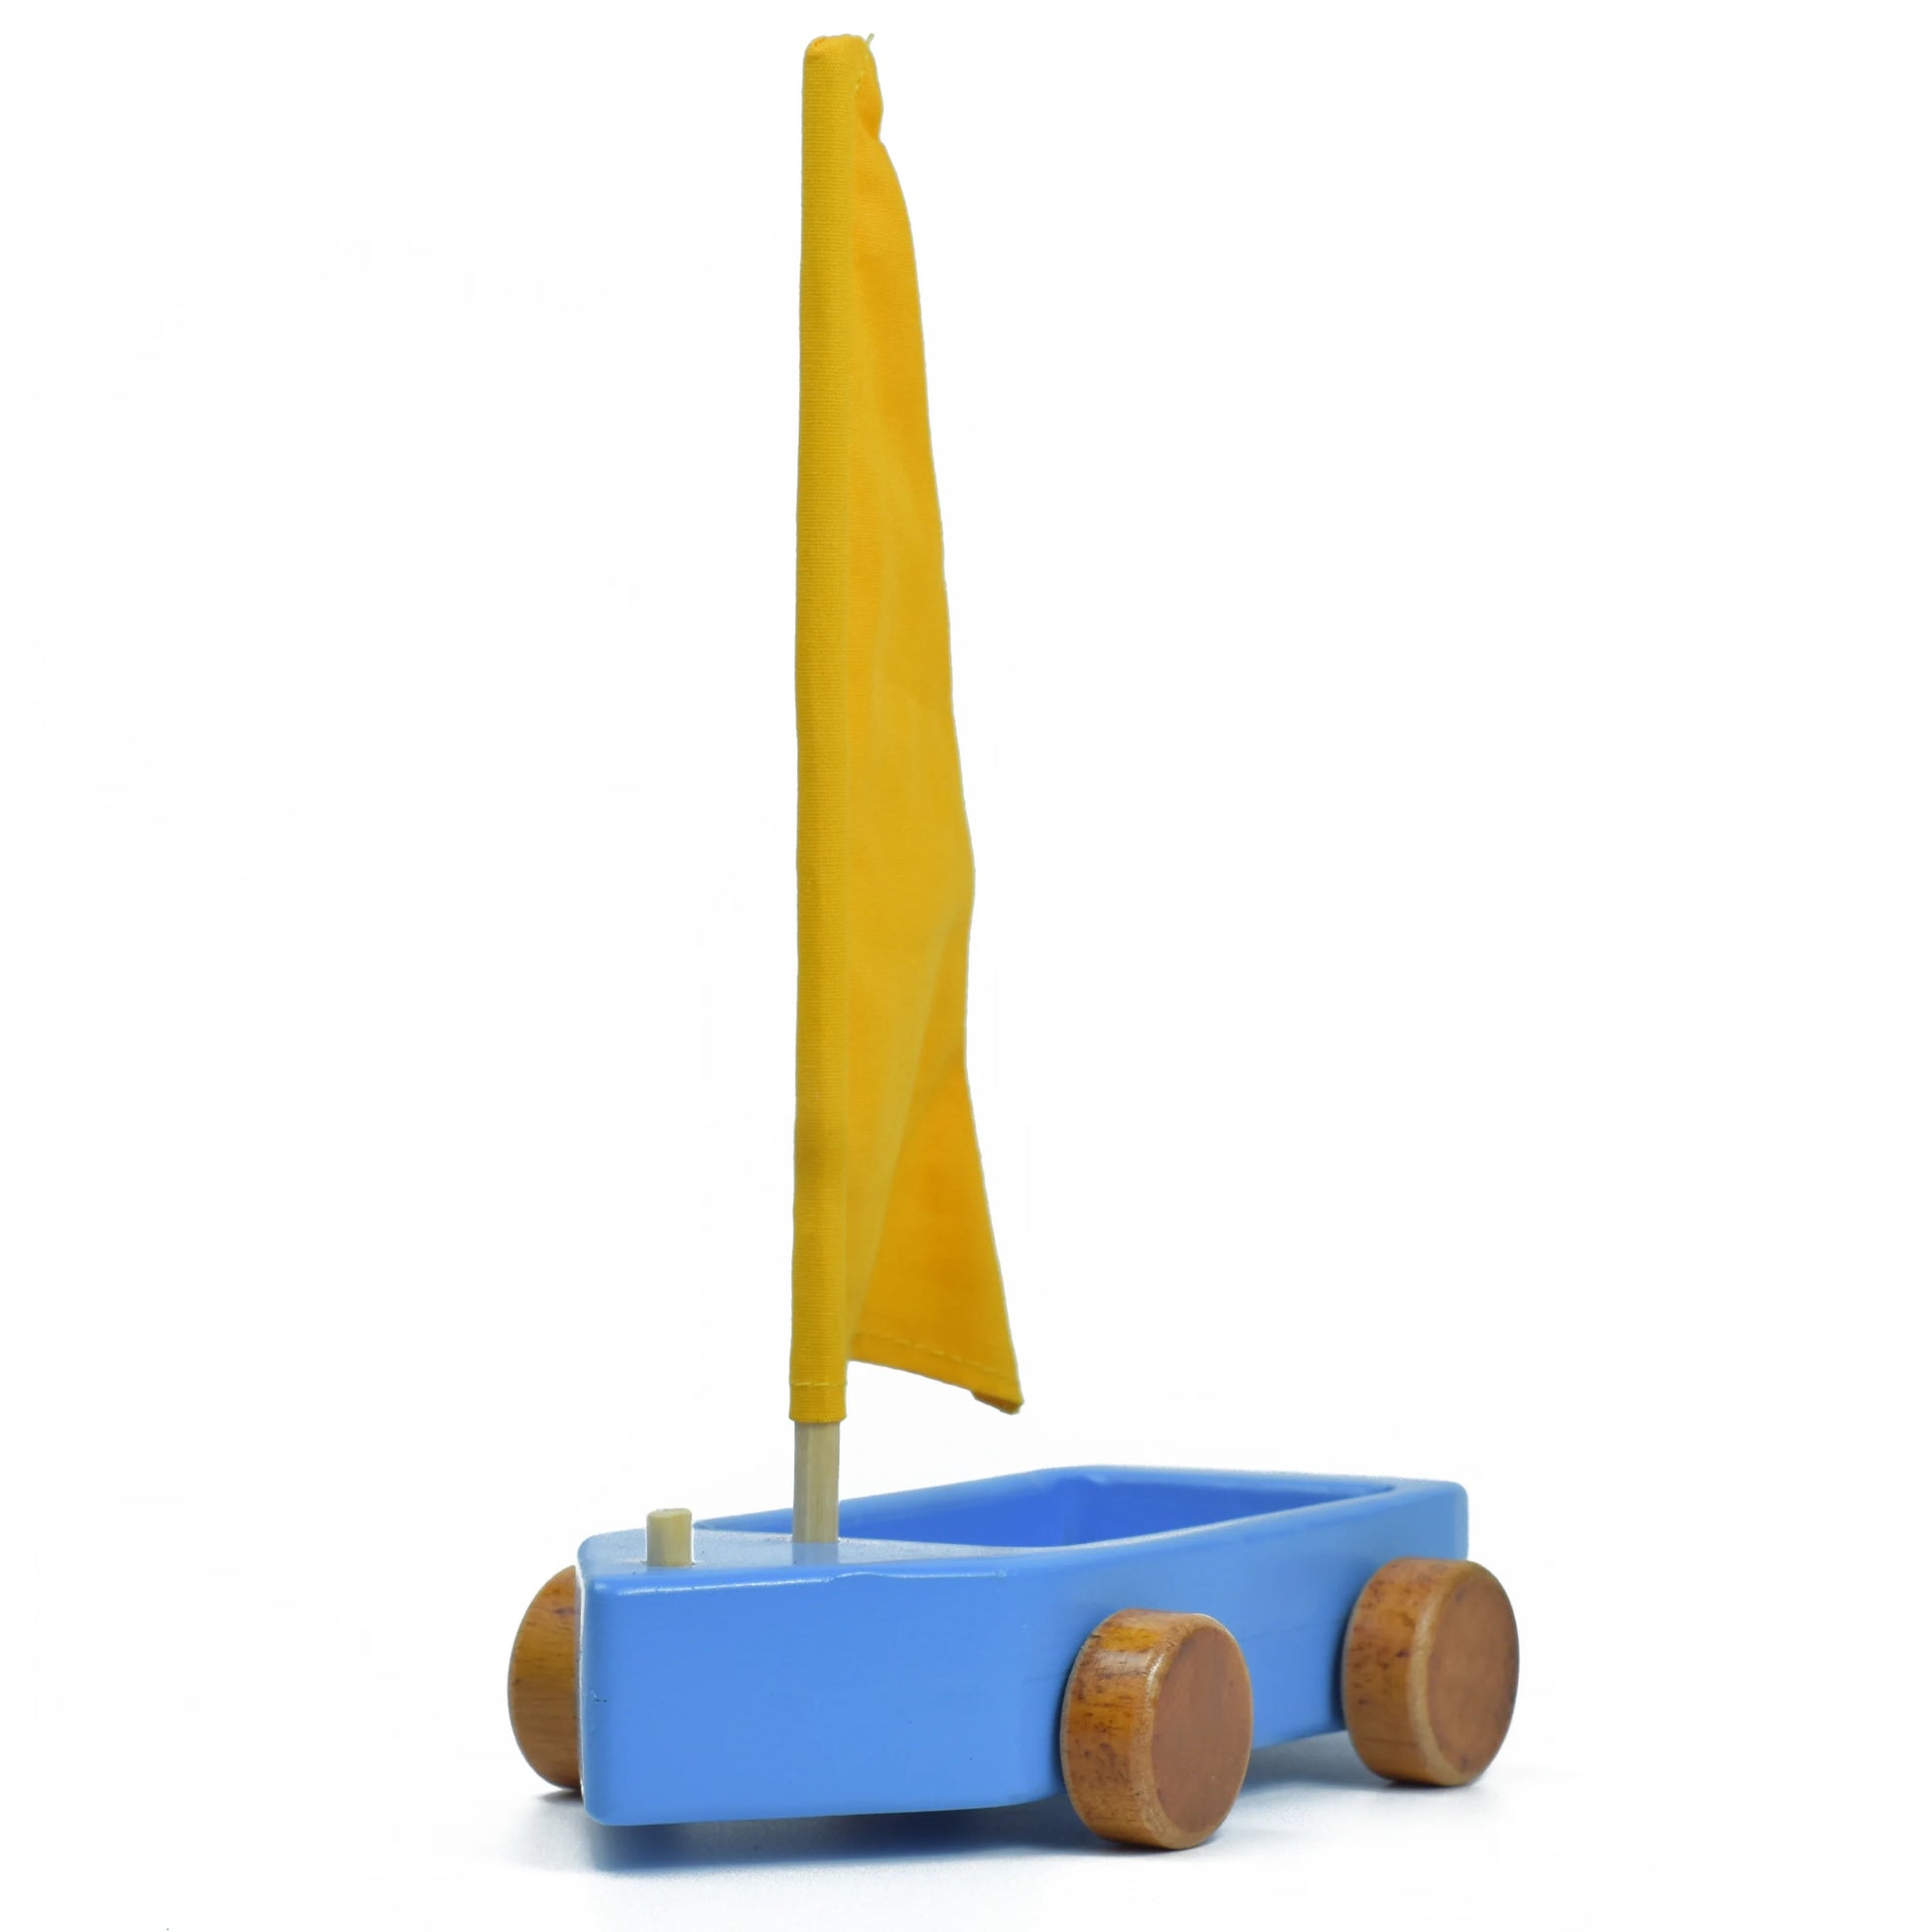 Buy Wooden Boat Play Toy - SkilloToys.com